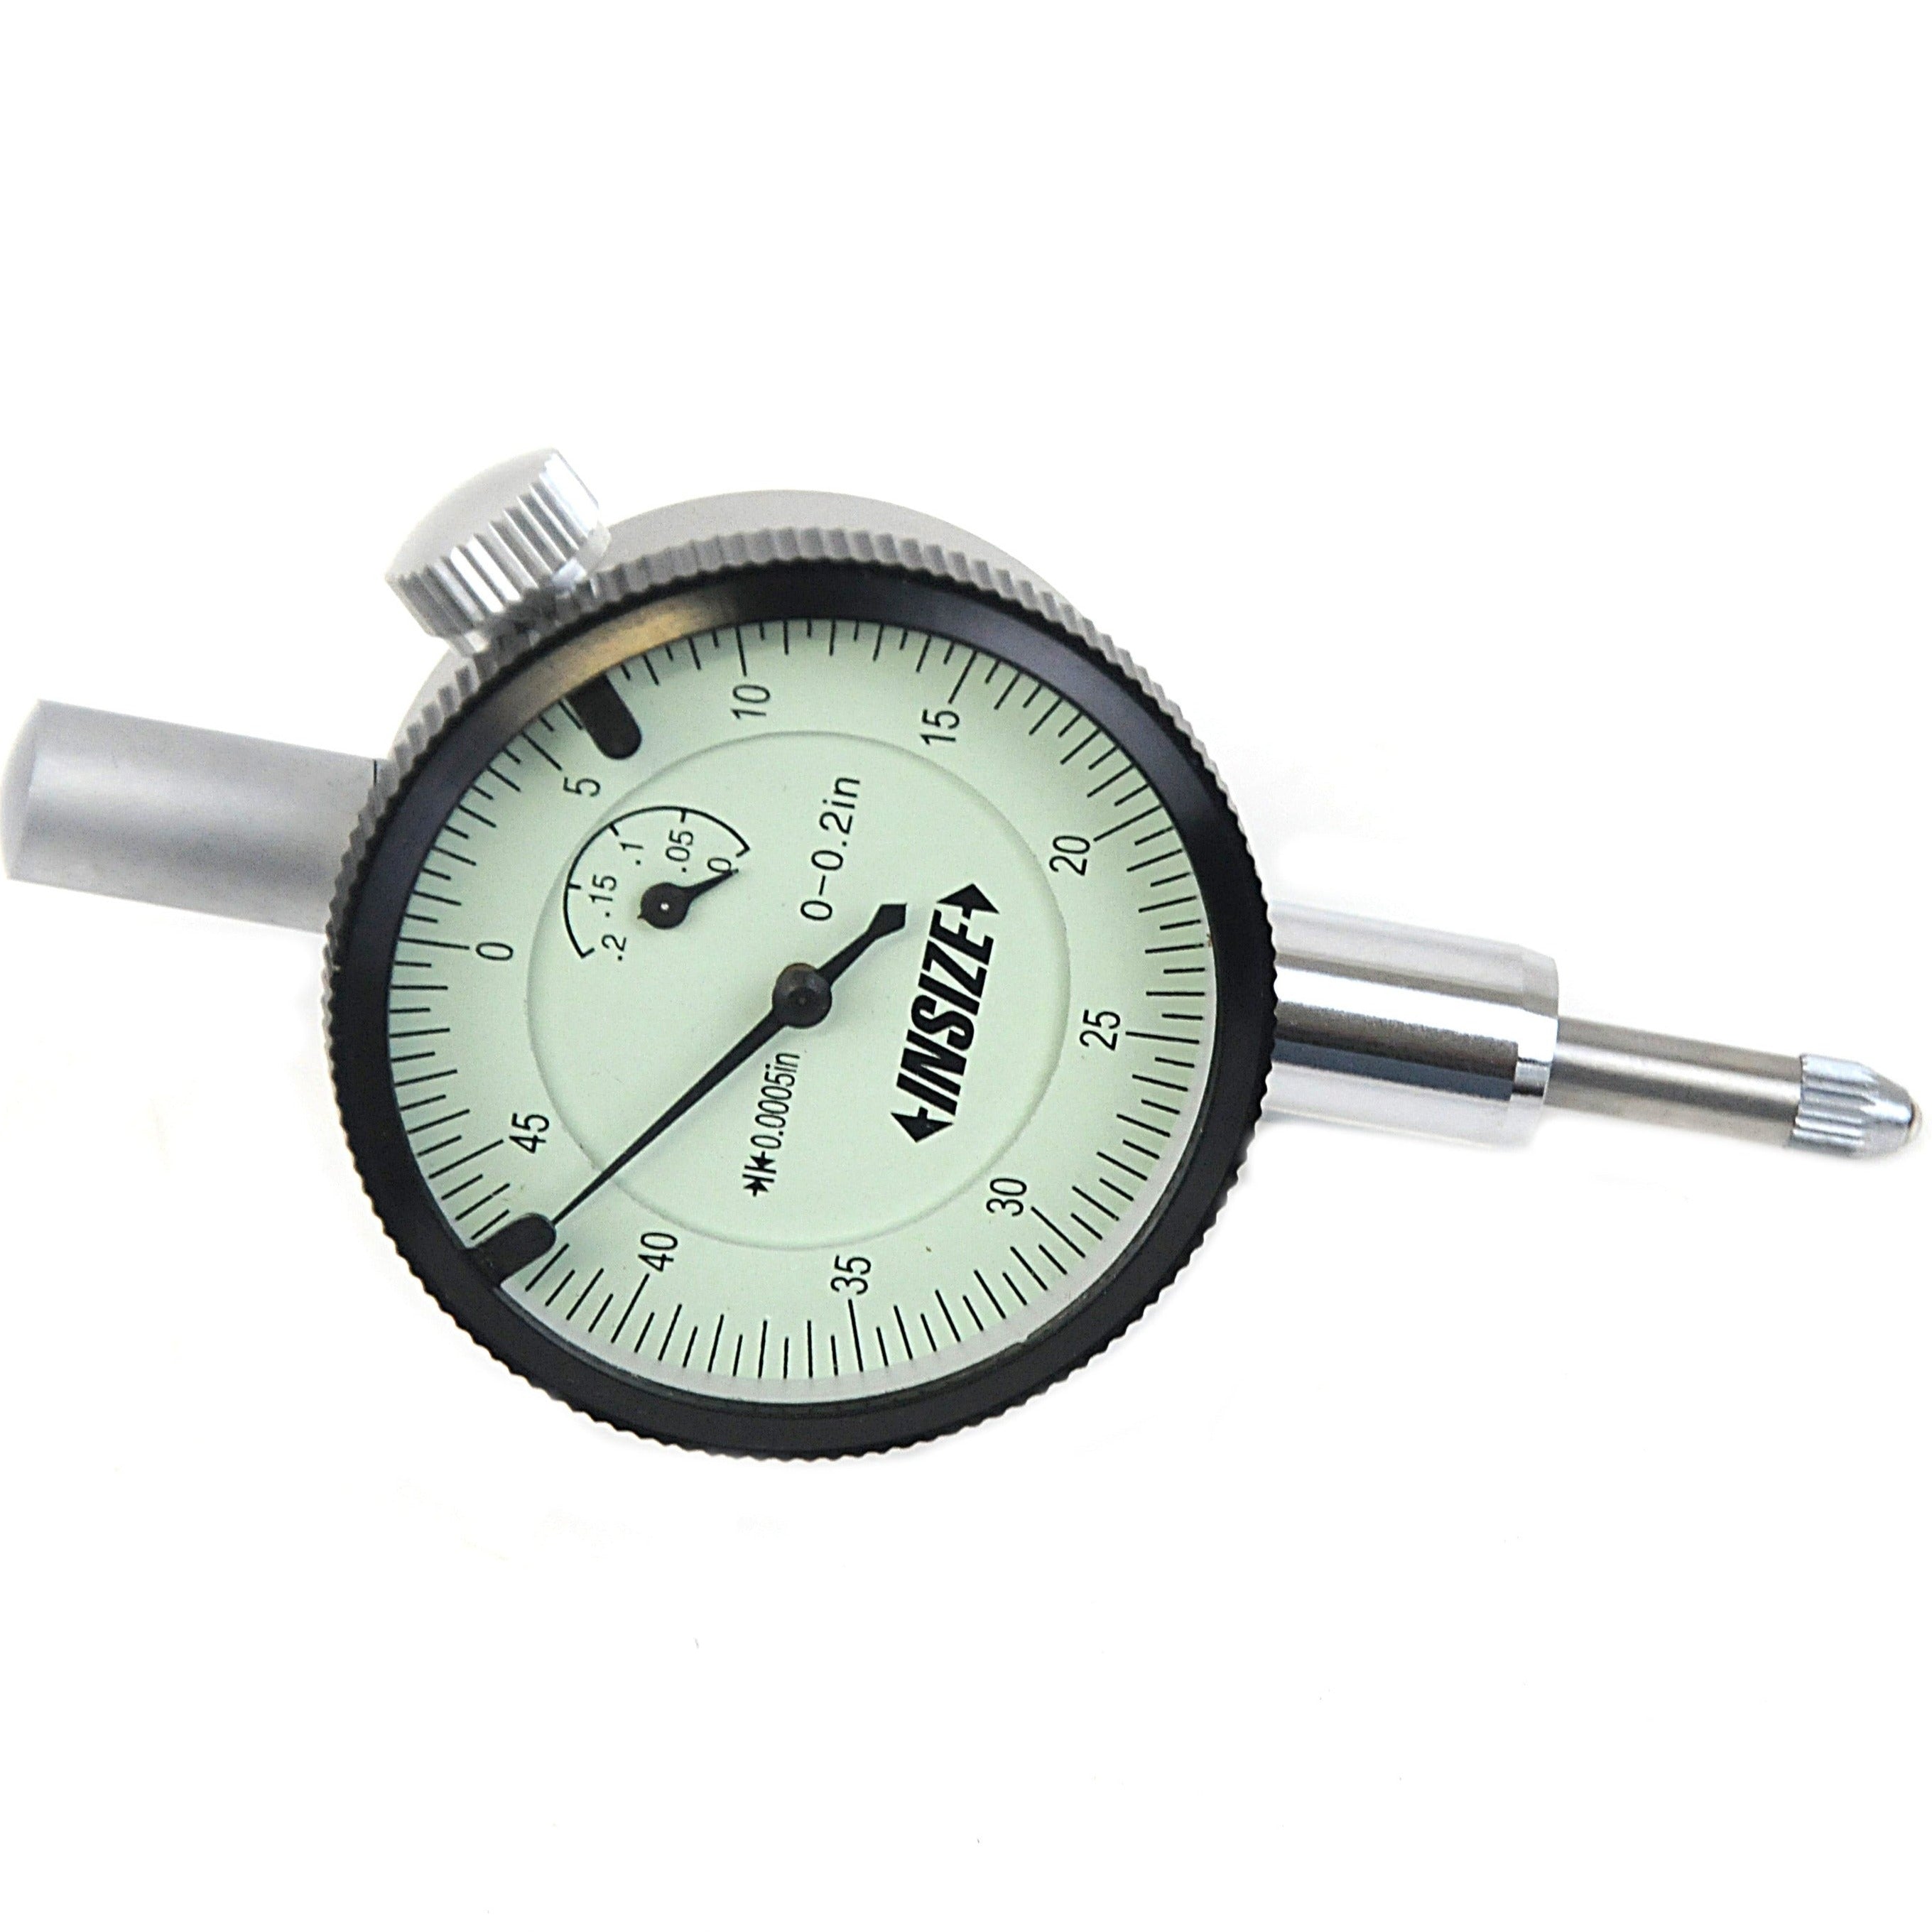 Insize Imperial Compact Dial Indicator Range  0 - 0.2" 2304-0205